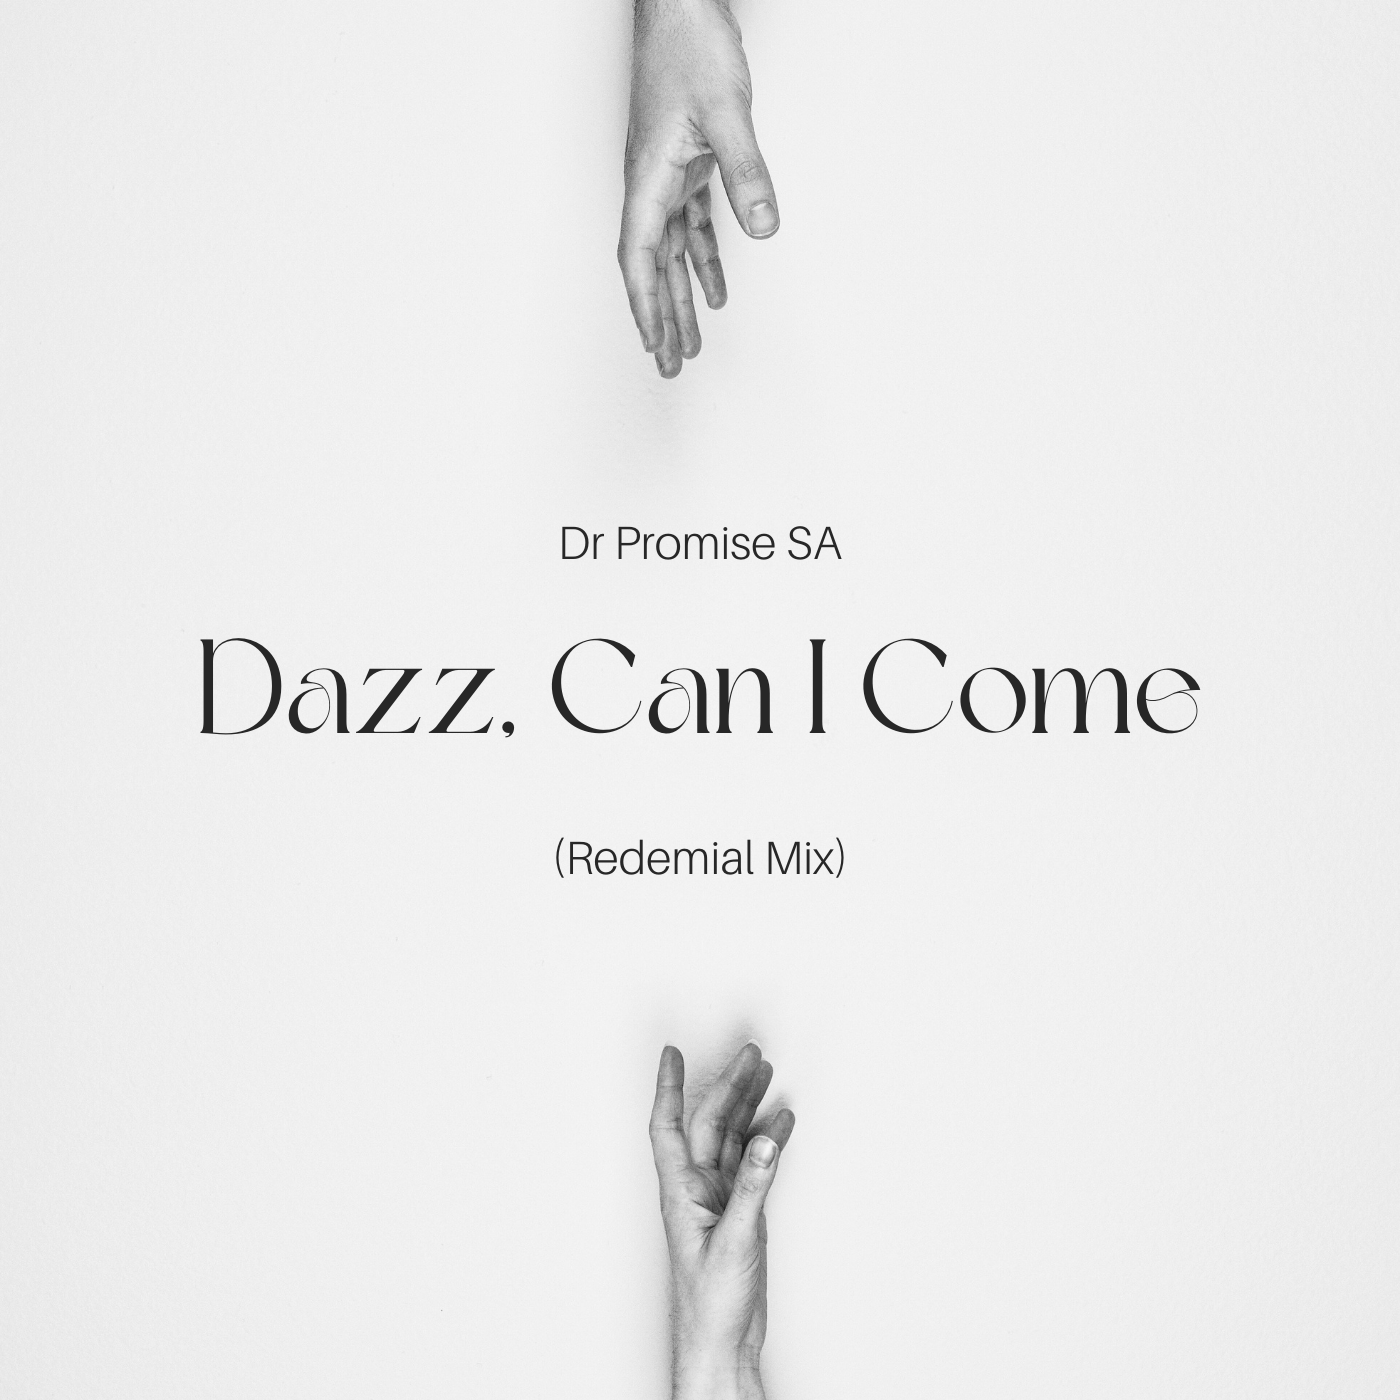 Dazz, Can I Come (Redemial Mix) Image